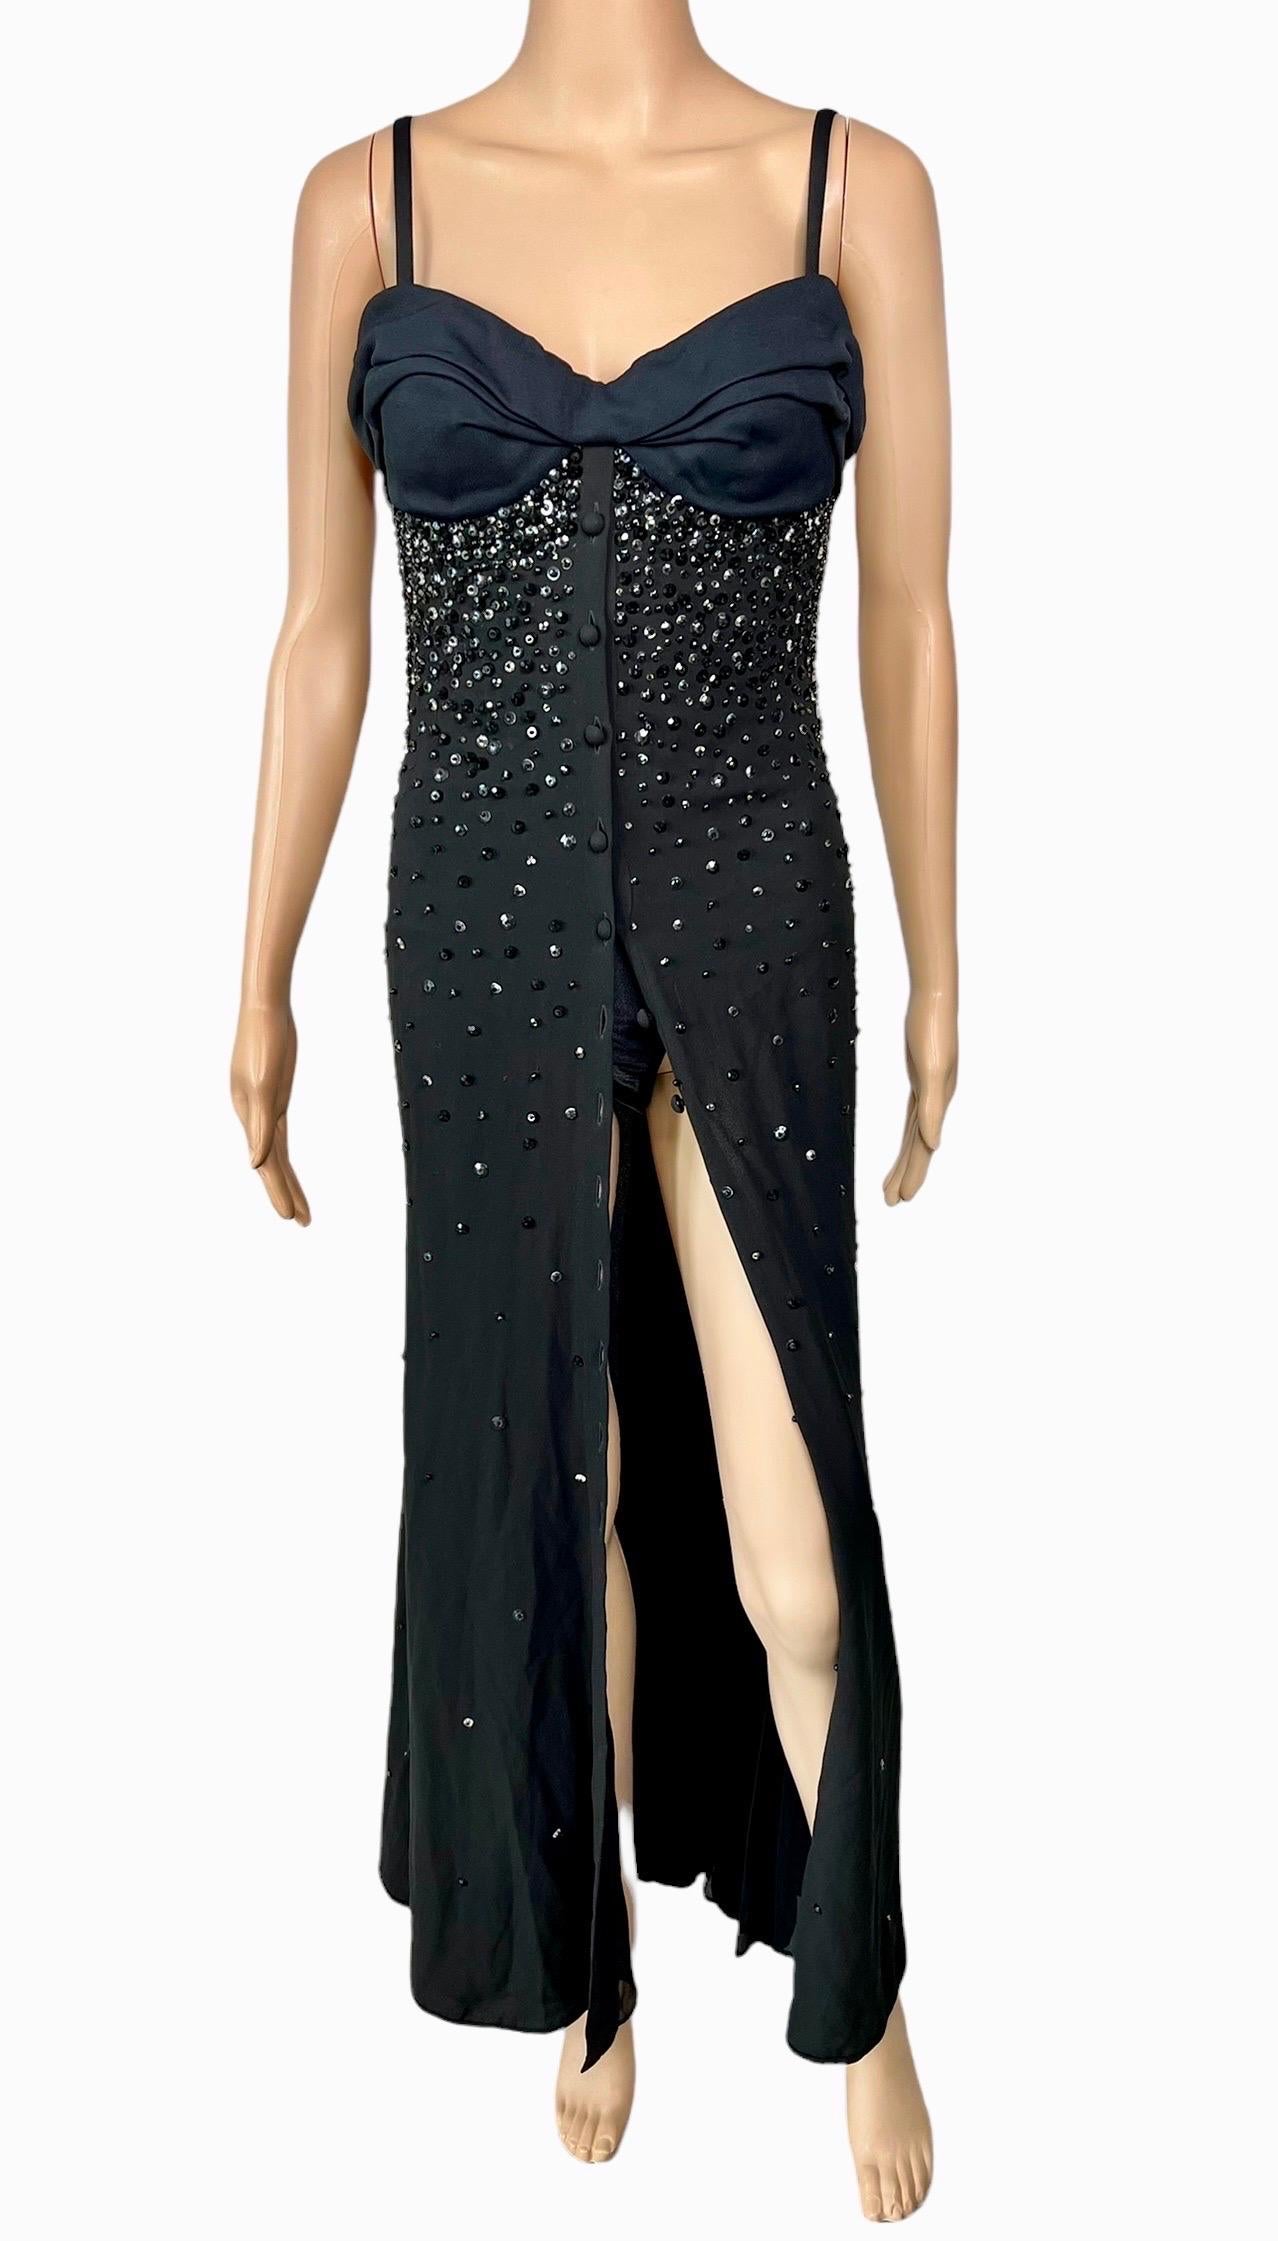 Gianni Versace S/S 1996 Runway Vintage Embellished Bustier Silk Dress Gown IT 42

Look 63 from the Spring 1996 Collection.

Condition: Excellent with the original tax attached.



